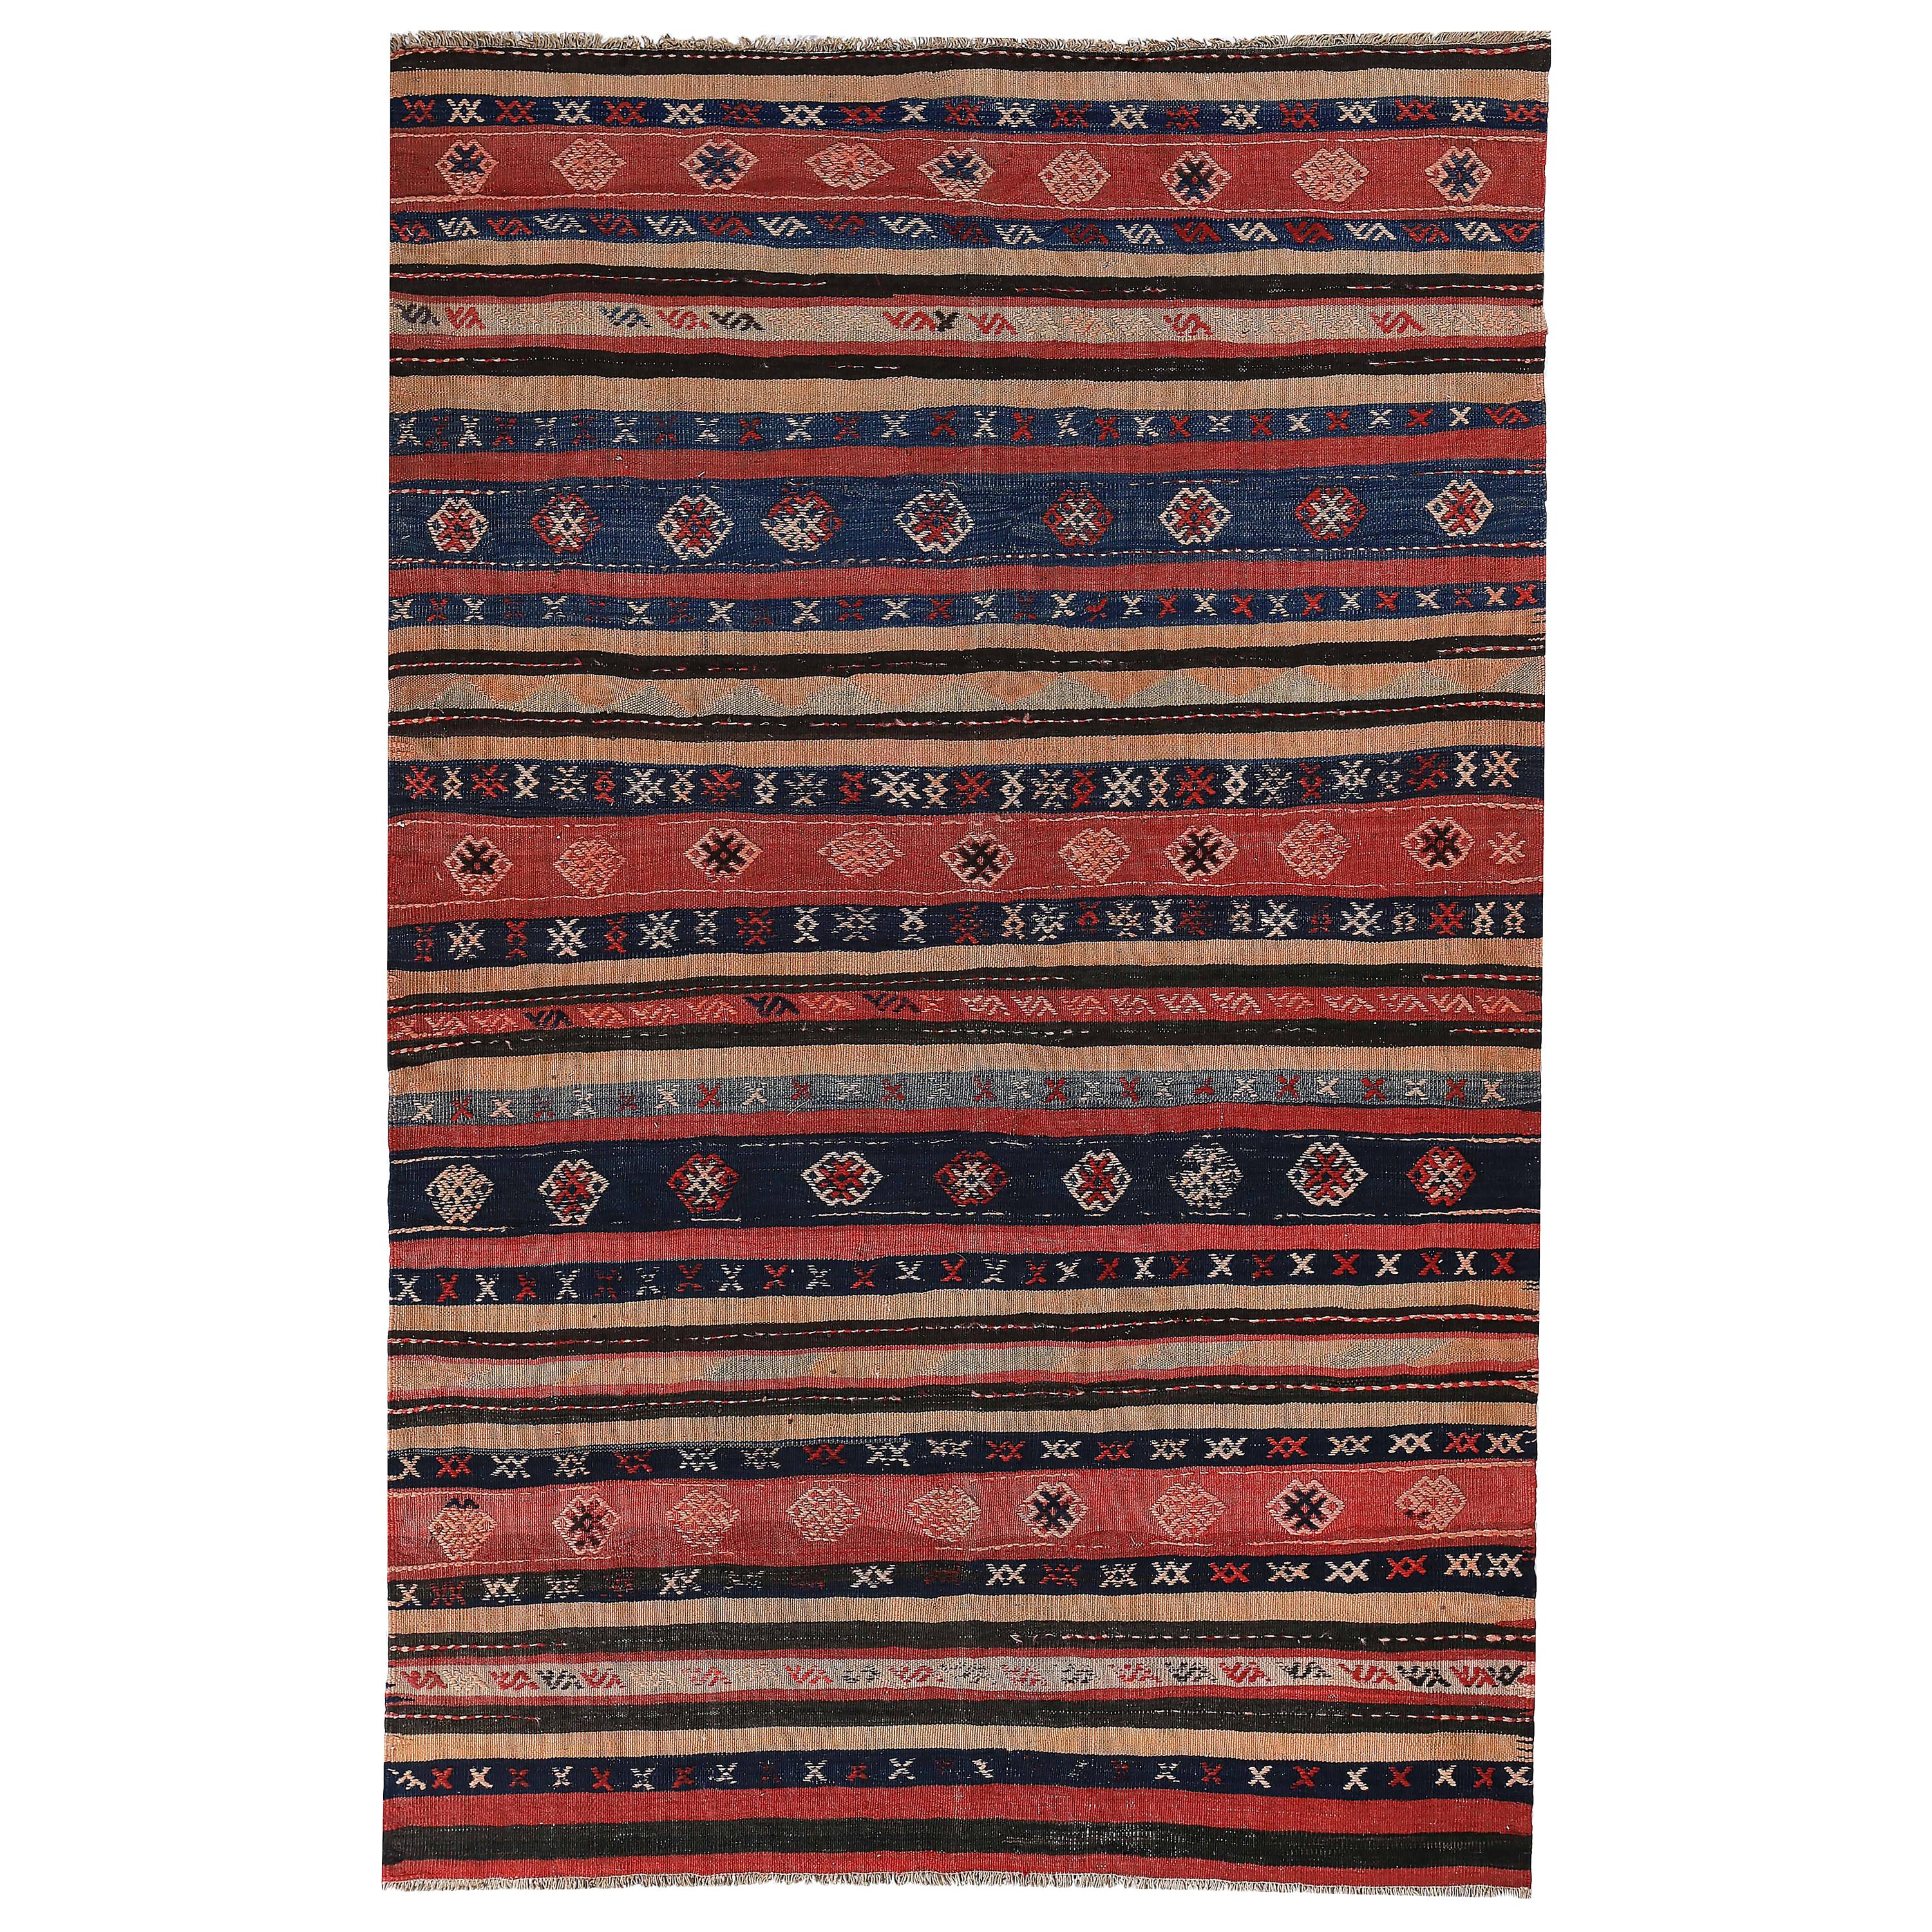 Modern Turkish Kilim Rug with Red and Navy Stripes Decorated with Tribal Details